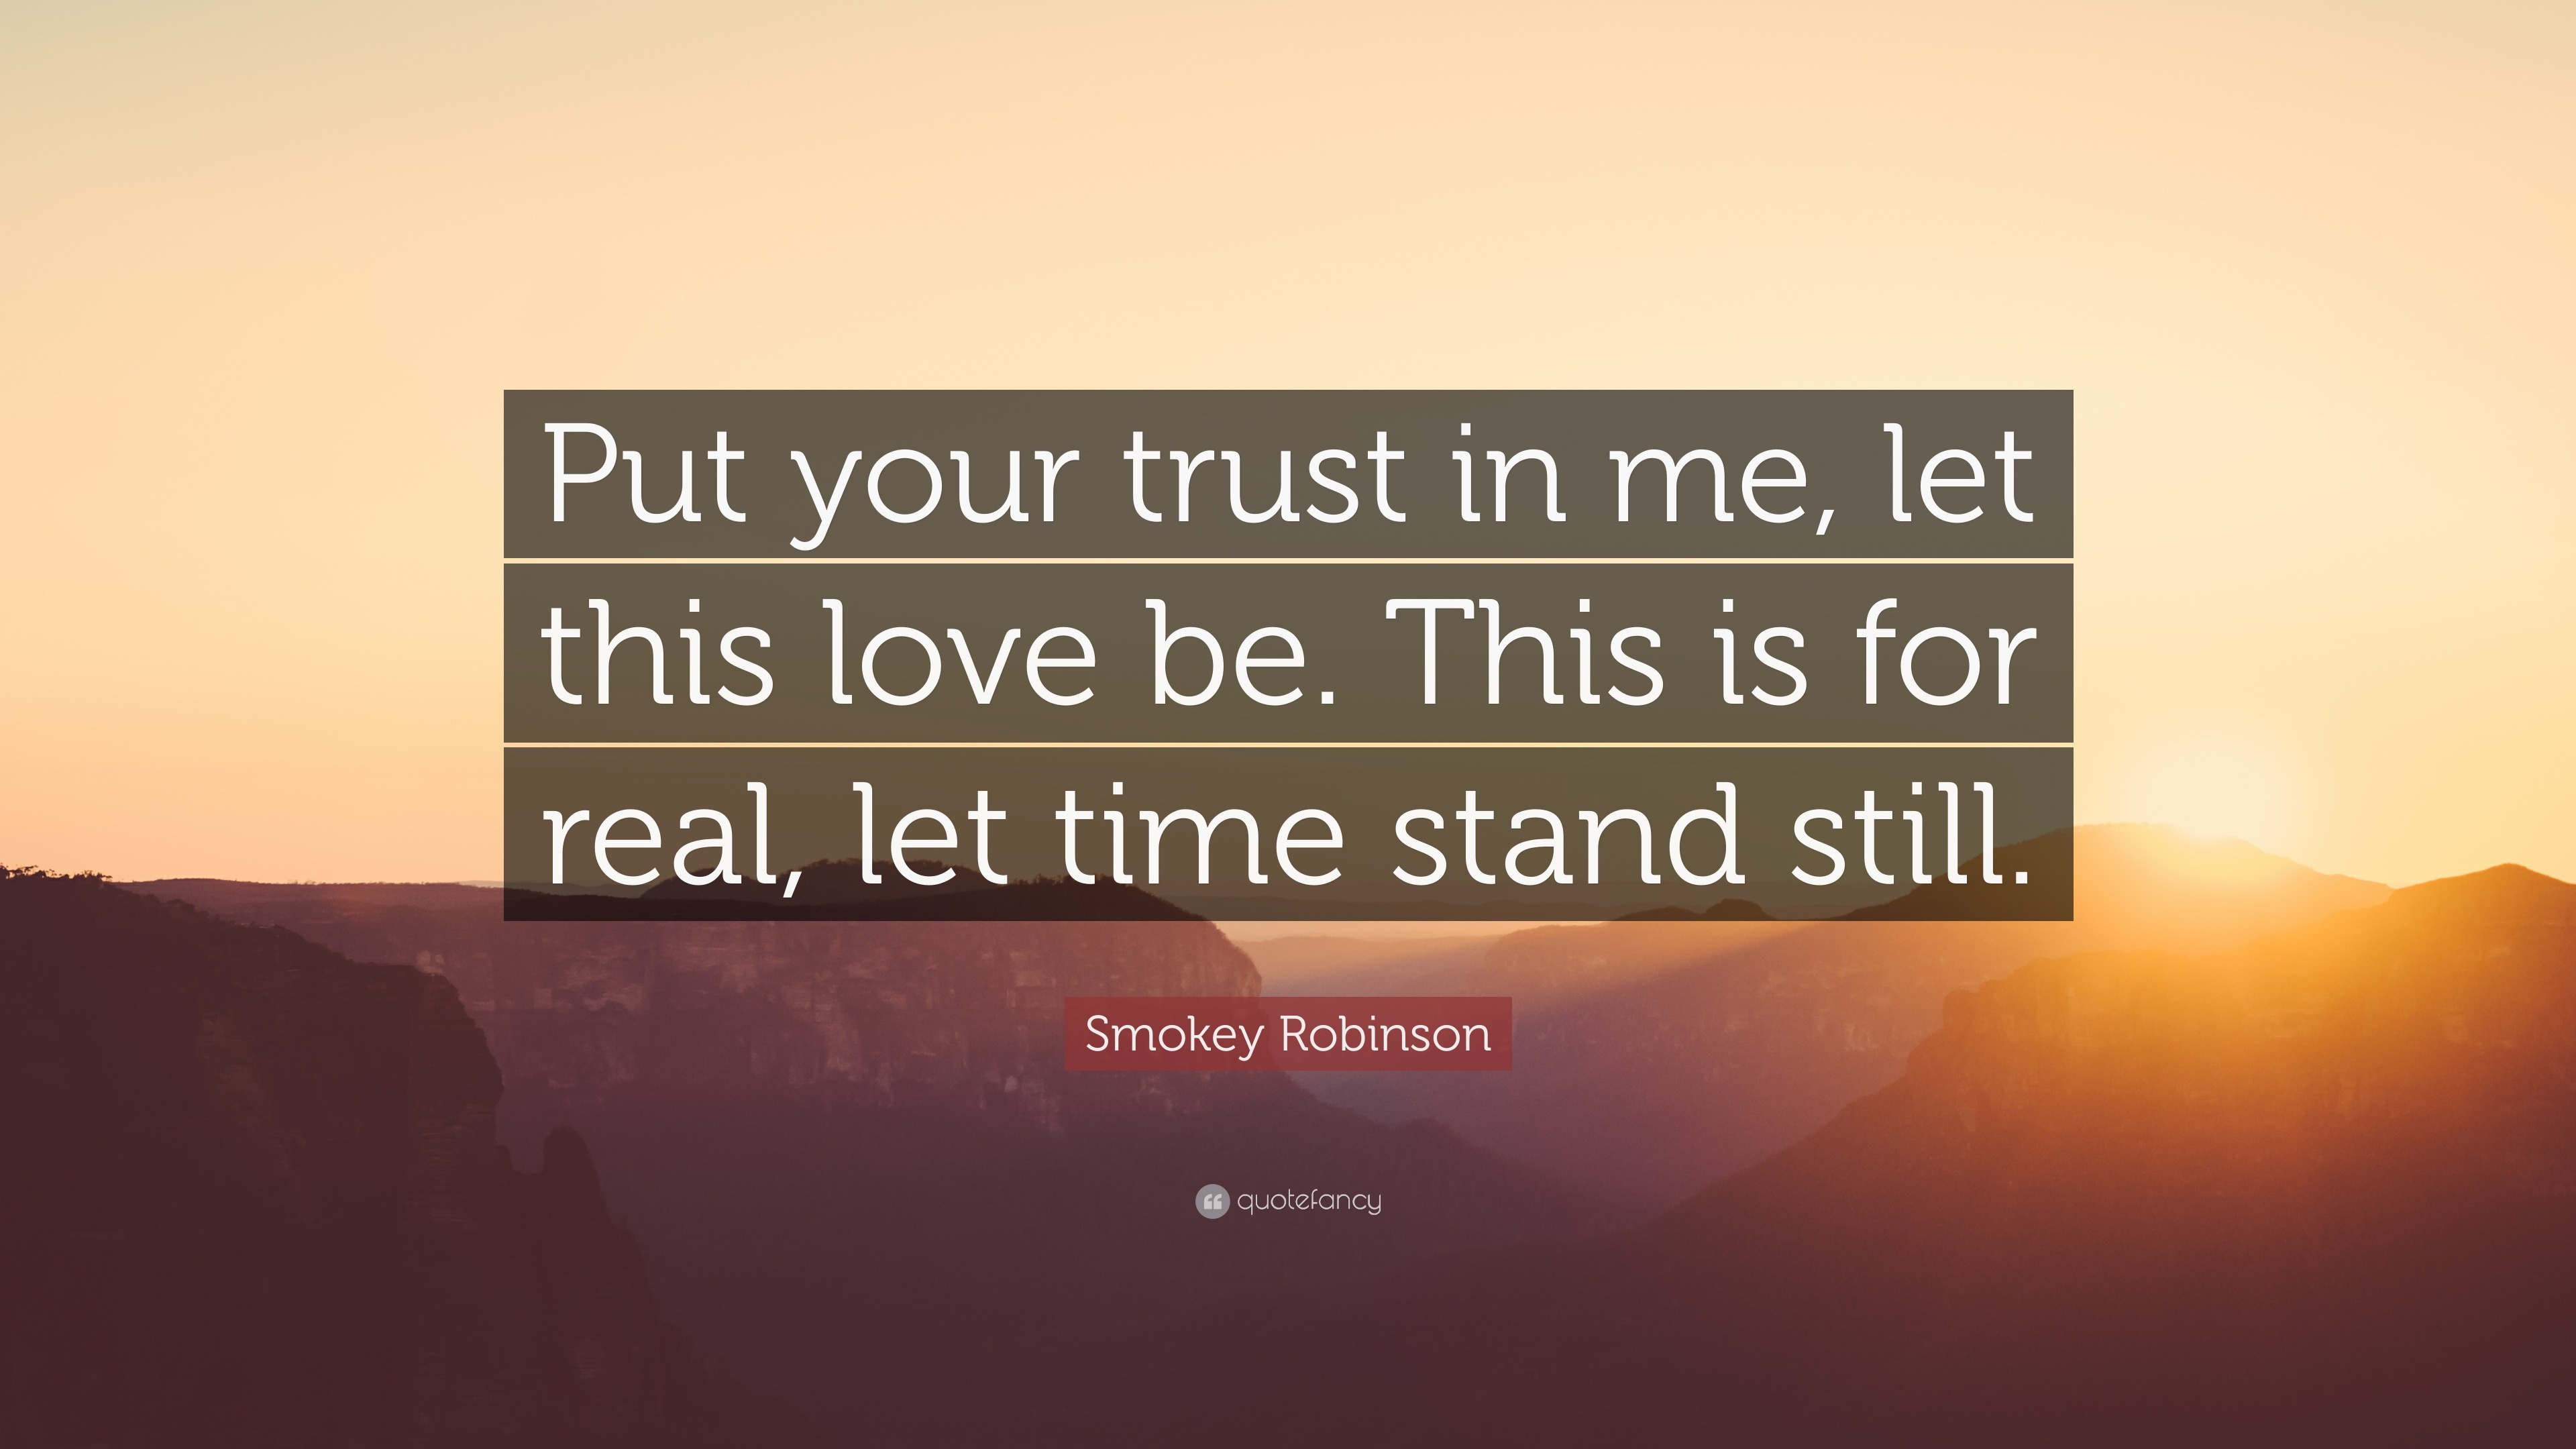 Smokey Robinson Quote “Put your trust in me let this love be